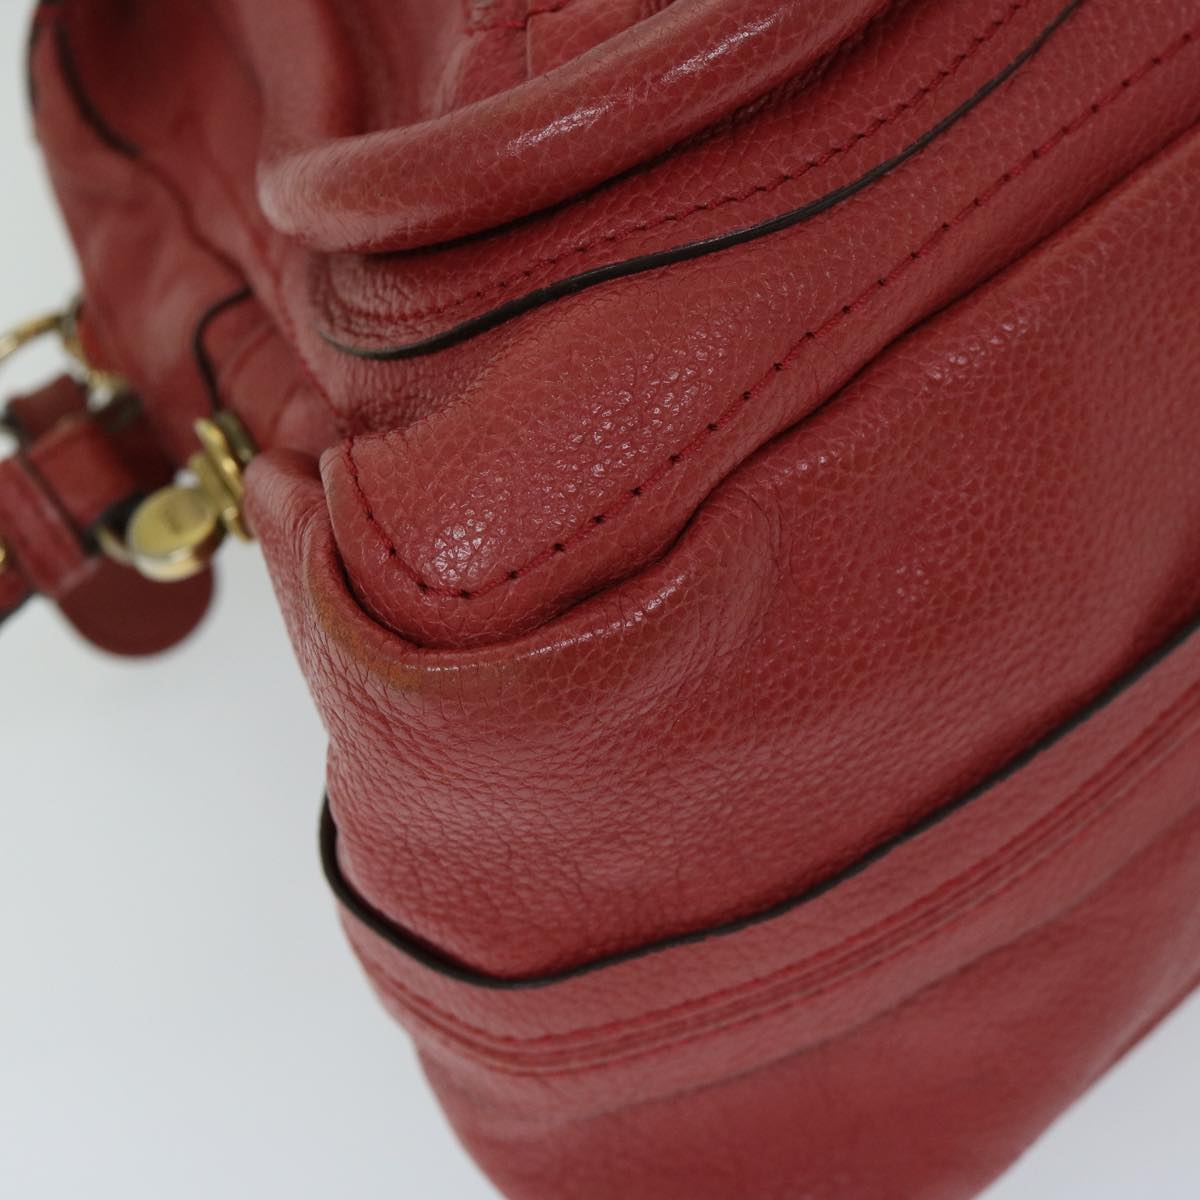 Chloe Paraty Hand Bag Leather Red Auth 67266